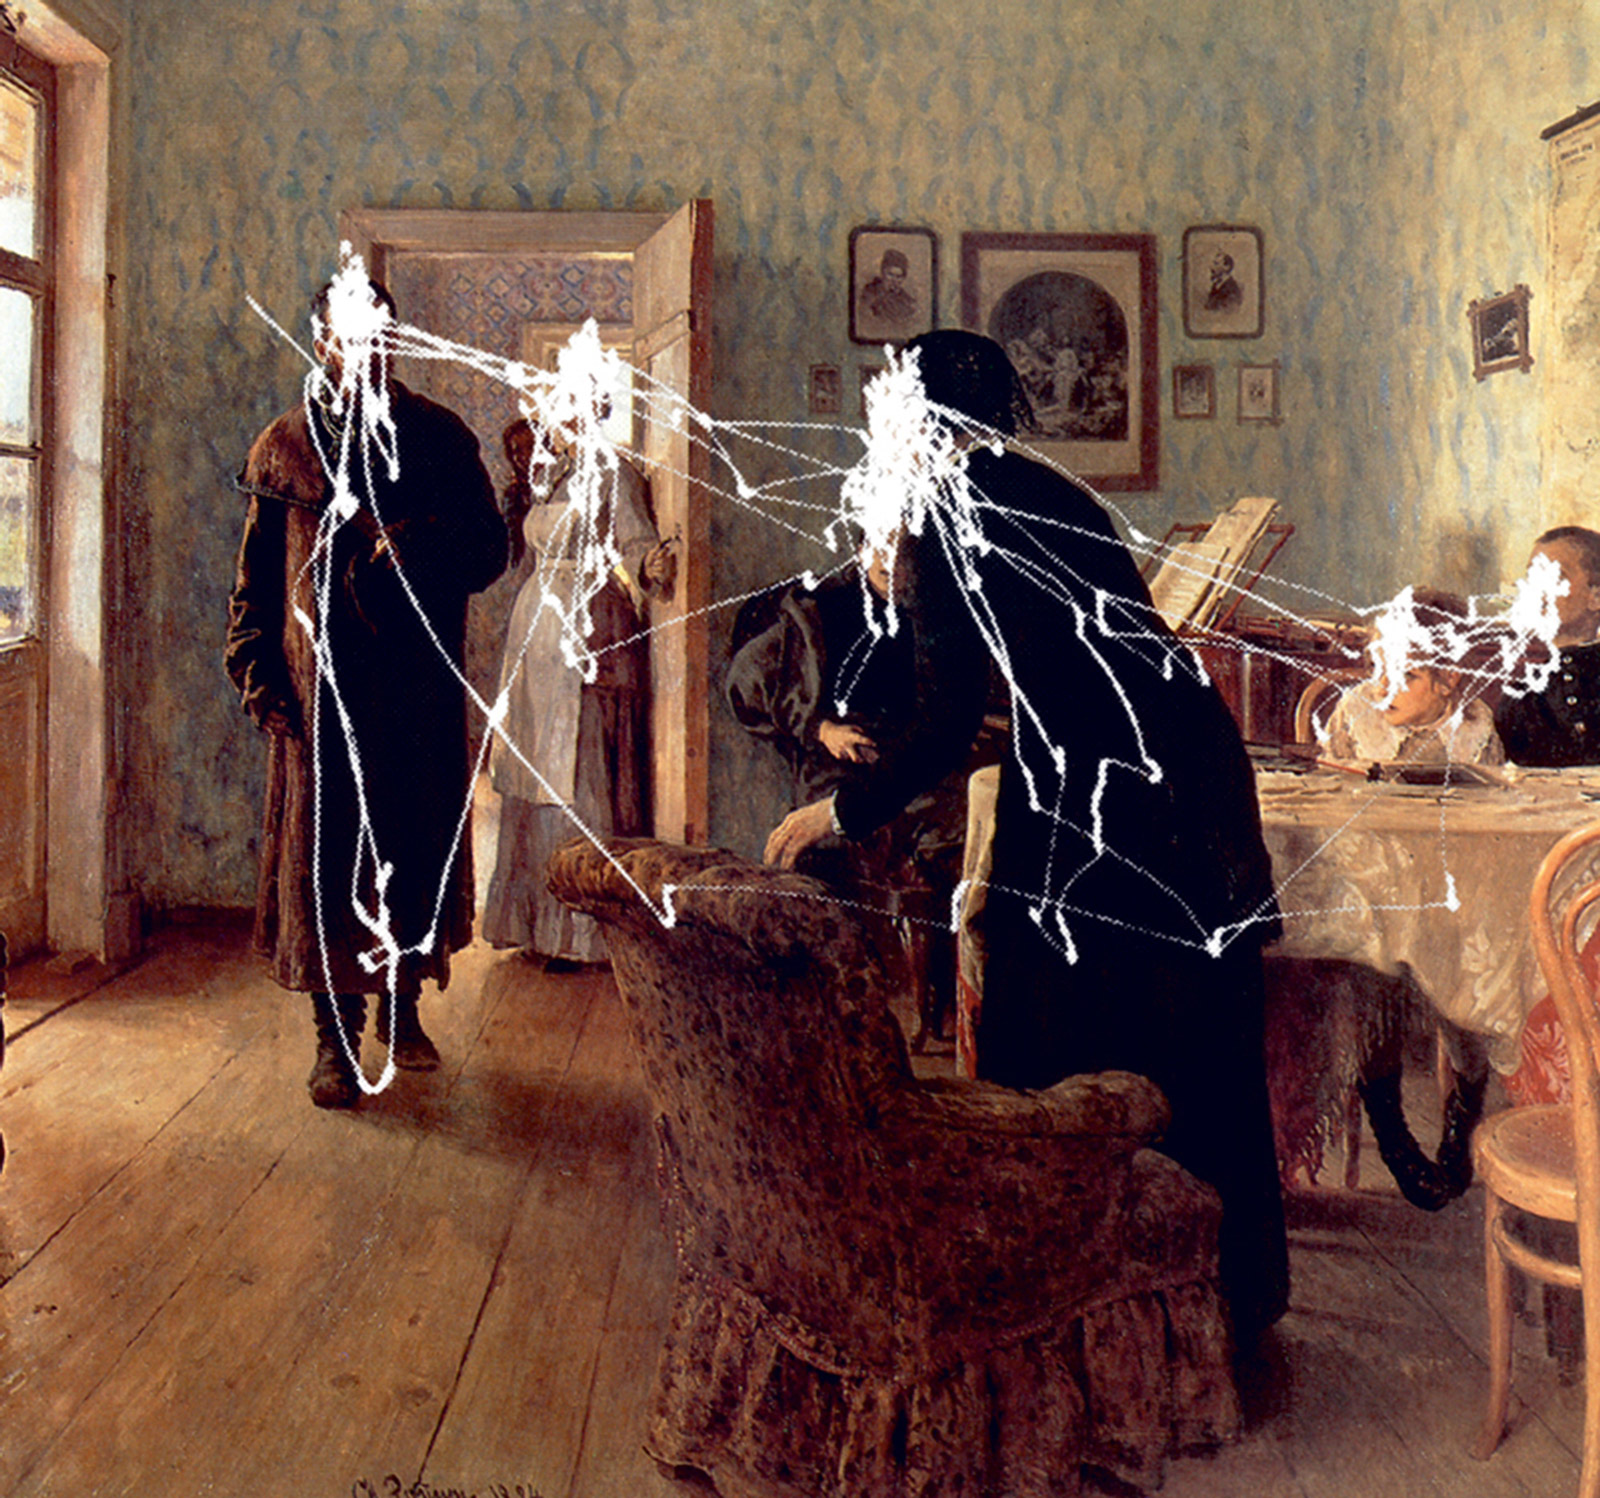 Ilya Repin’s eighteen eighty-four painting titled “An Unexpected Visitor,” marked with white lines that map the eye movements of a single subject asked by Yarbus to assess the ages of the characters.